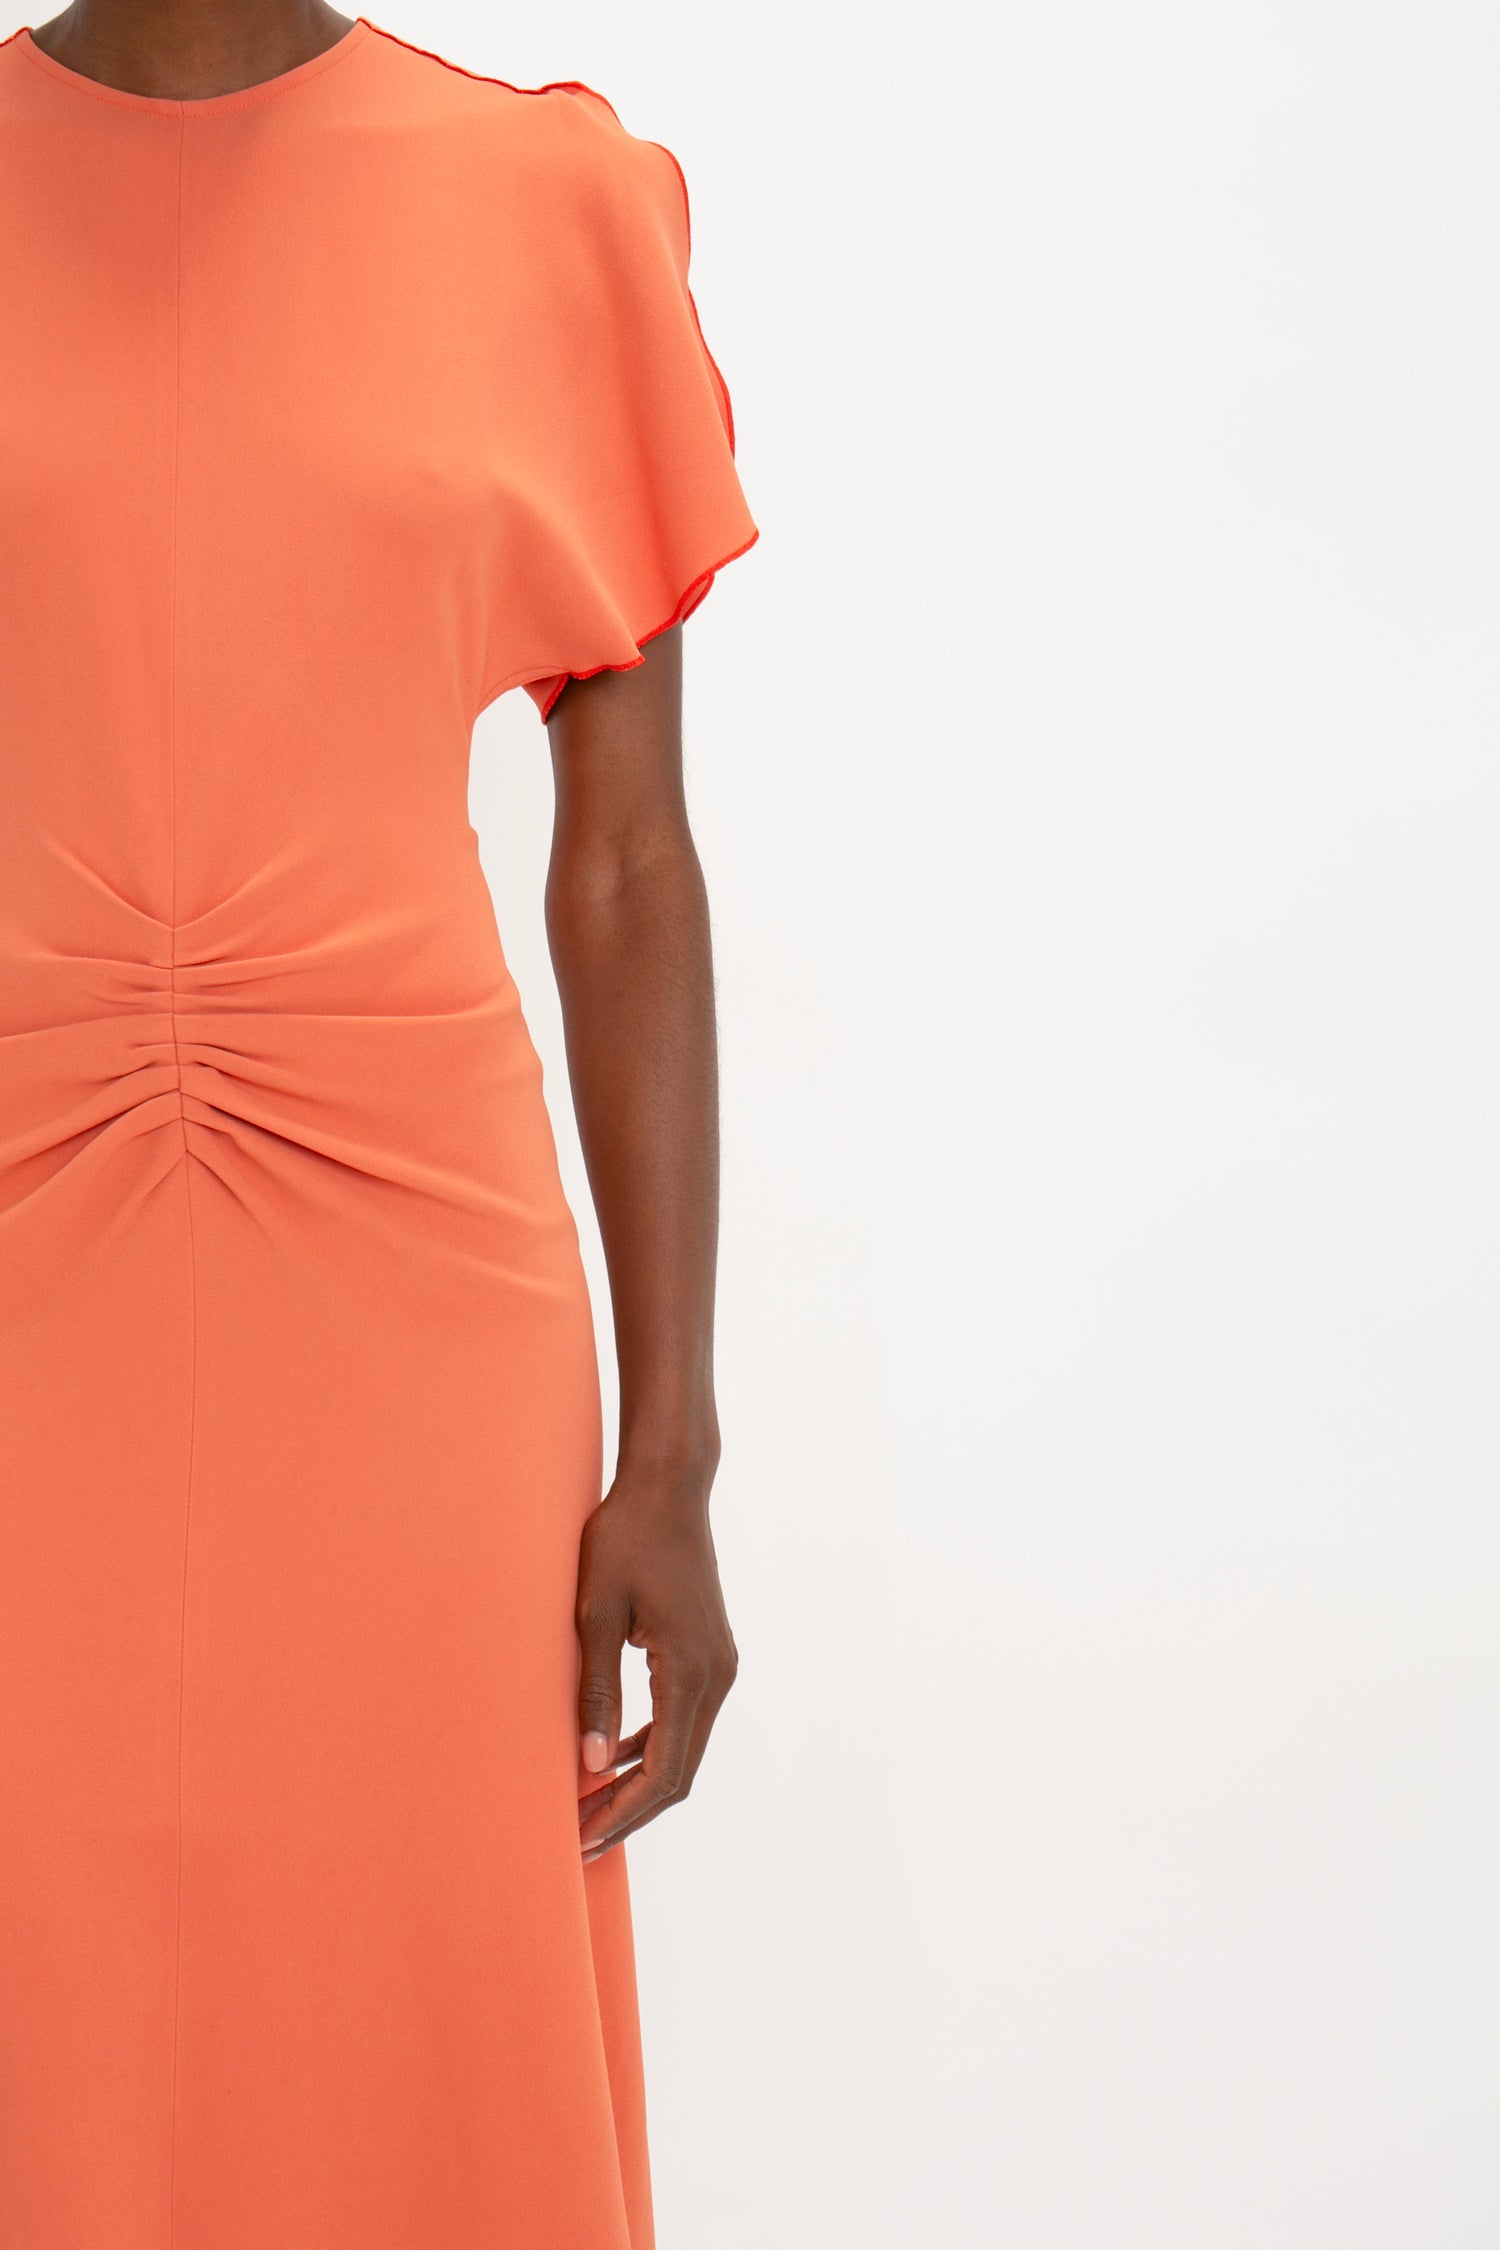 Woman wearing a bright Victoria Beckham papaya Gathered Waist Midi Dress with ruffled sleeves and a cinched waist detail, cropped to show from shoulders to mid-thigh.